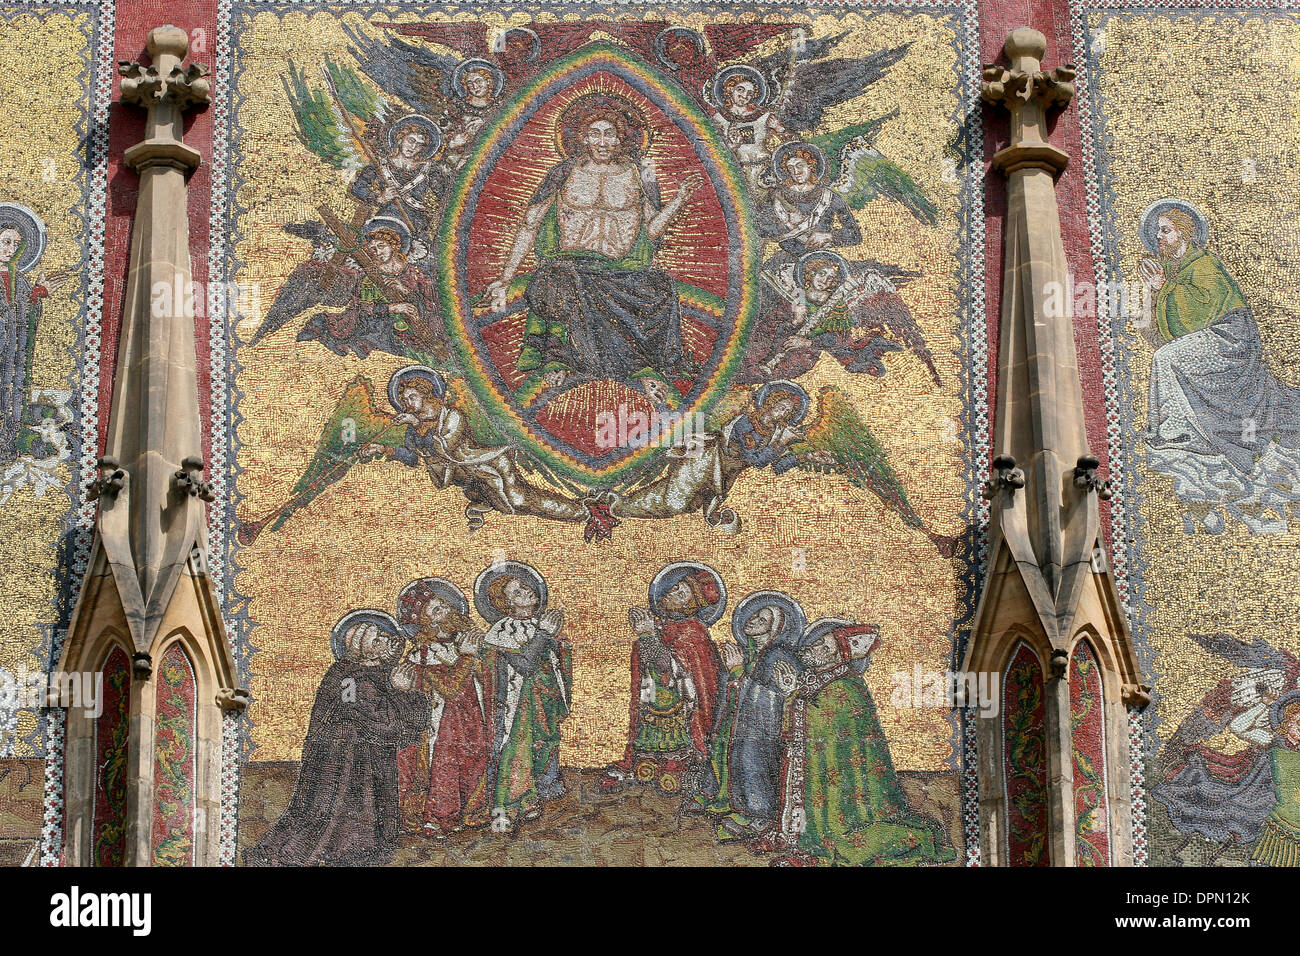 Czech Republic. Prague. St. Vitus Cathedral. The Golden Gate. Mosaic of the Last Judgement (1372), by Niccoletto Semitecolo. Stock Photo